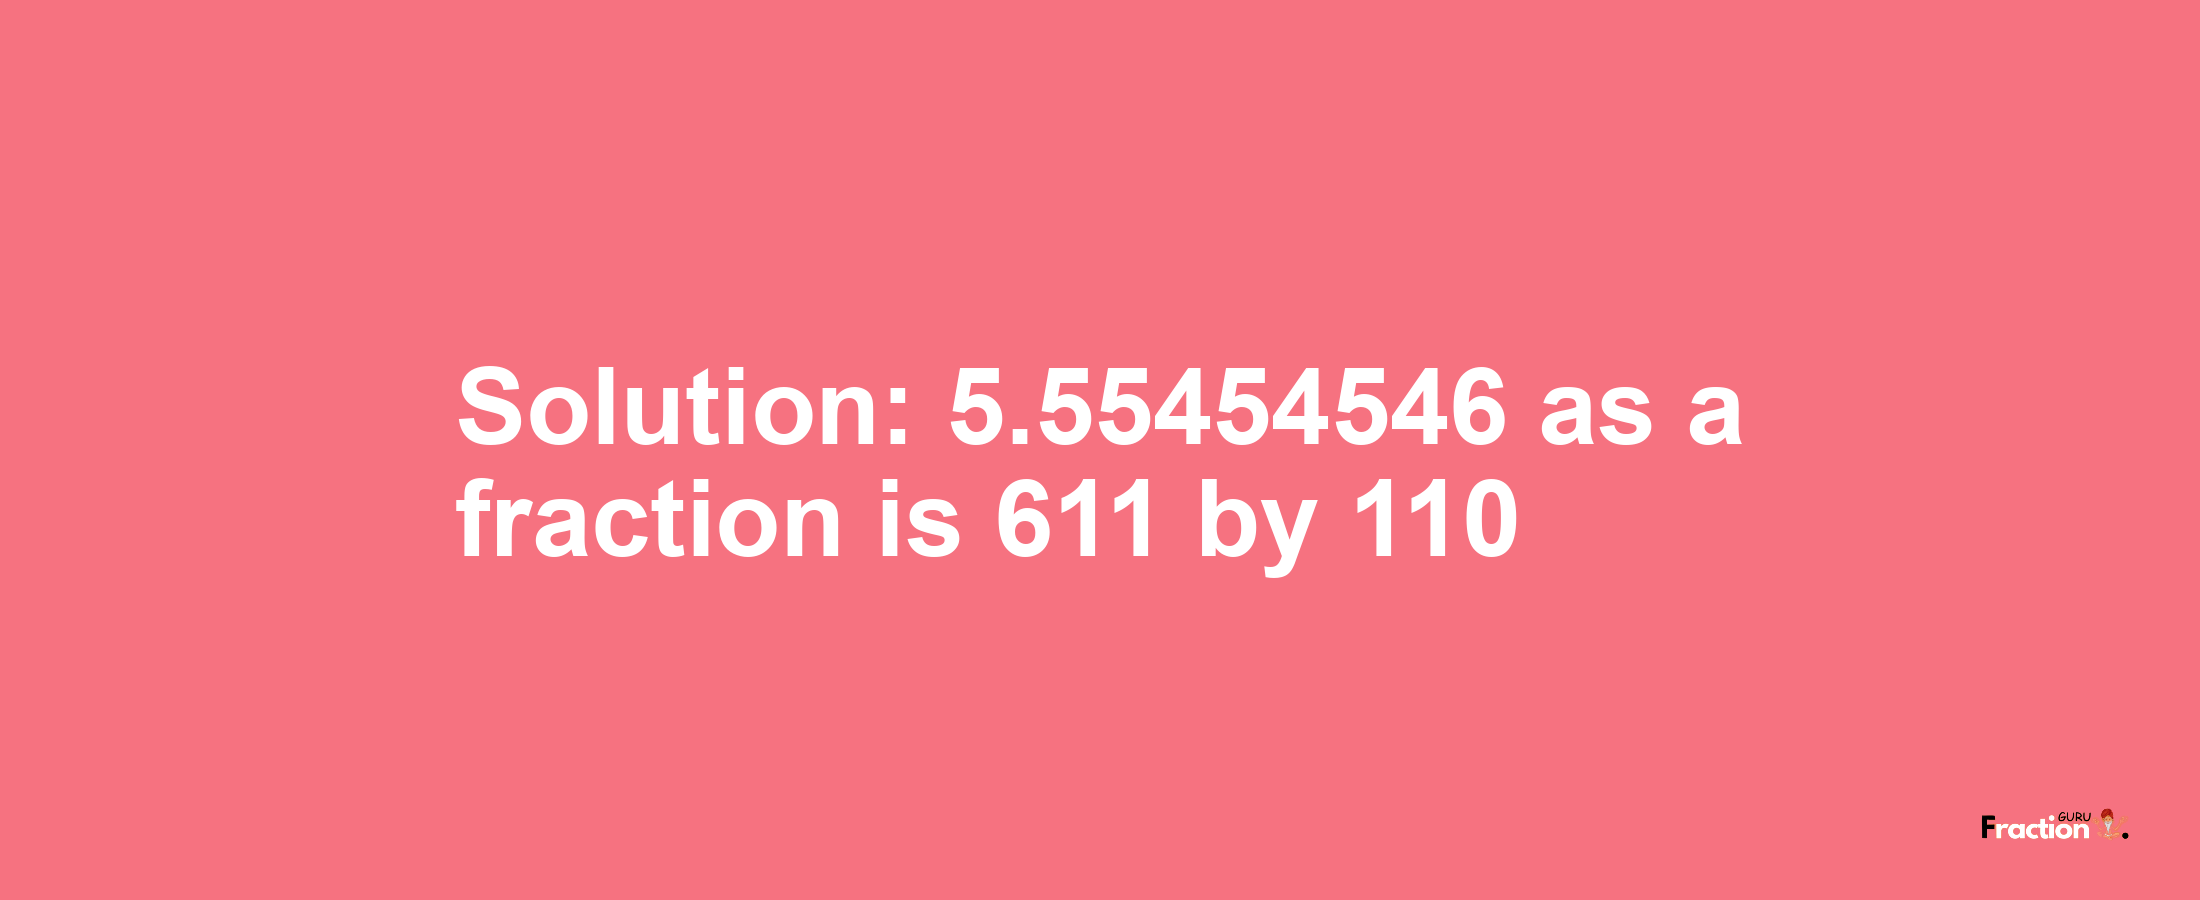 Solution:5.55454546 as a fraction is 611/110